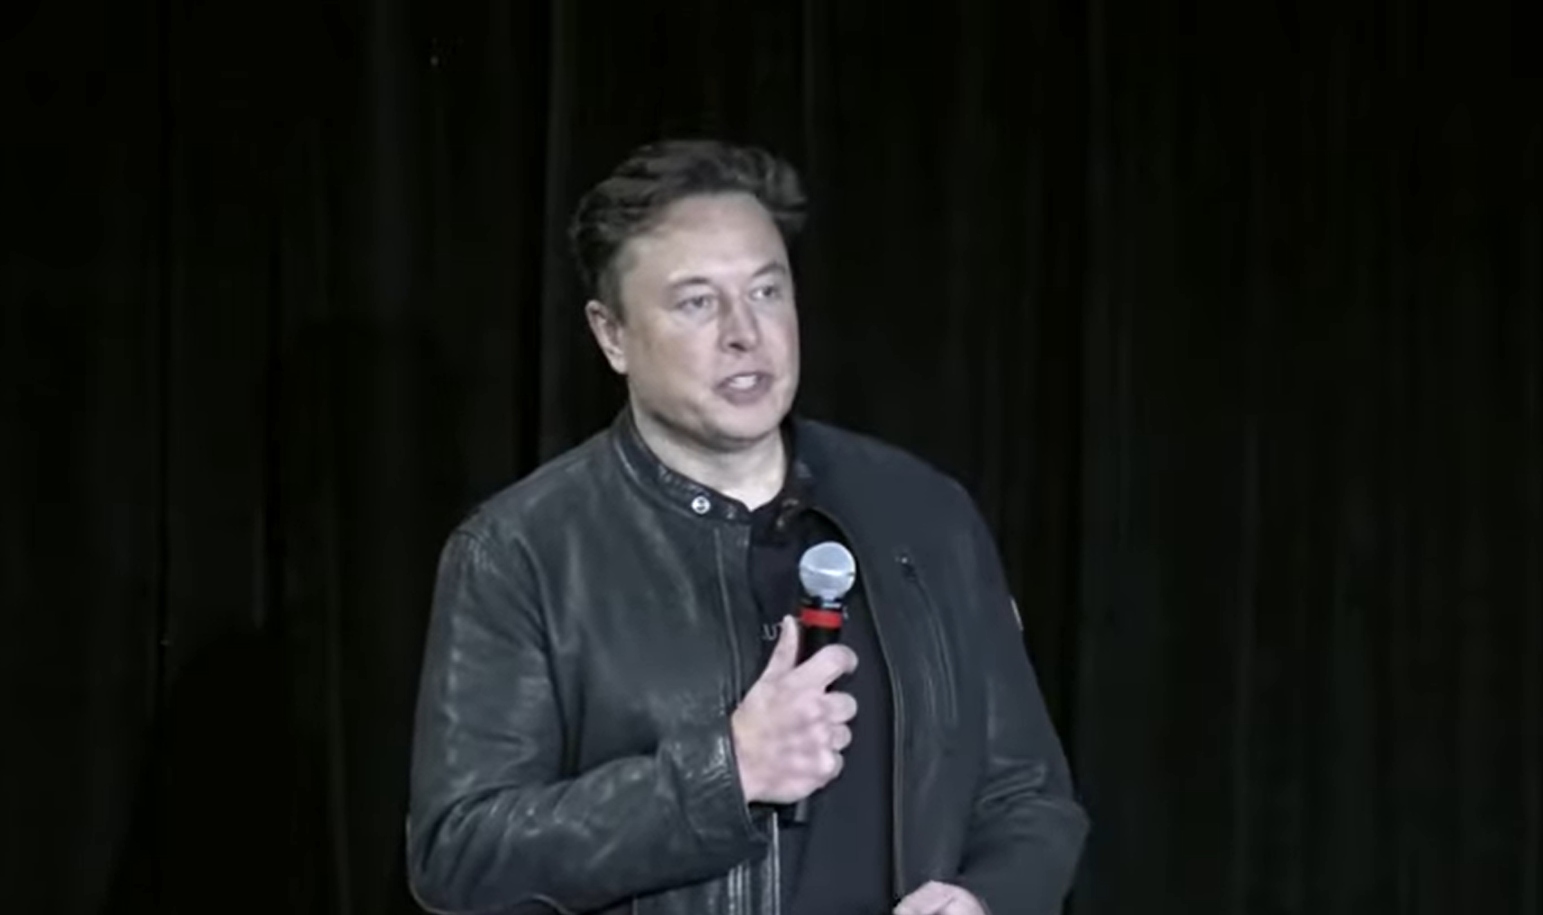 Elon Musk Becomes First to Find Way to Put Round Peg in Square Hole